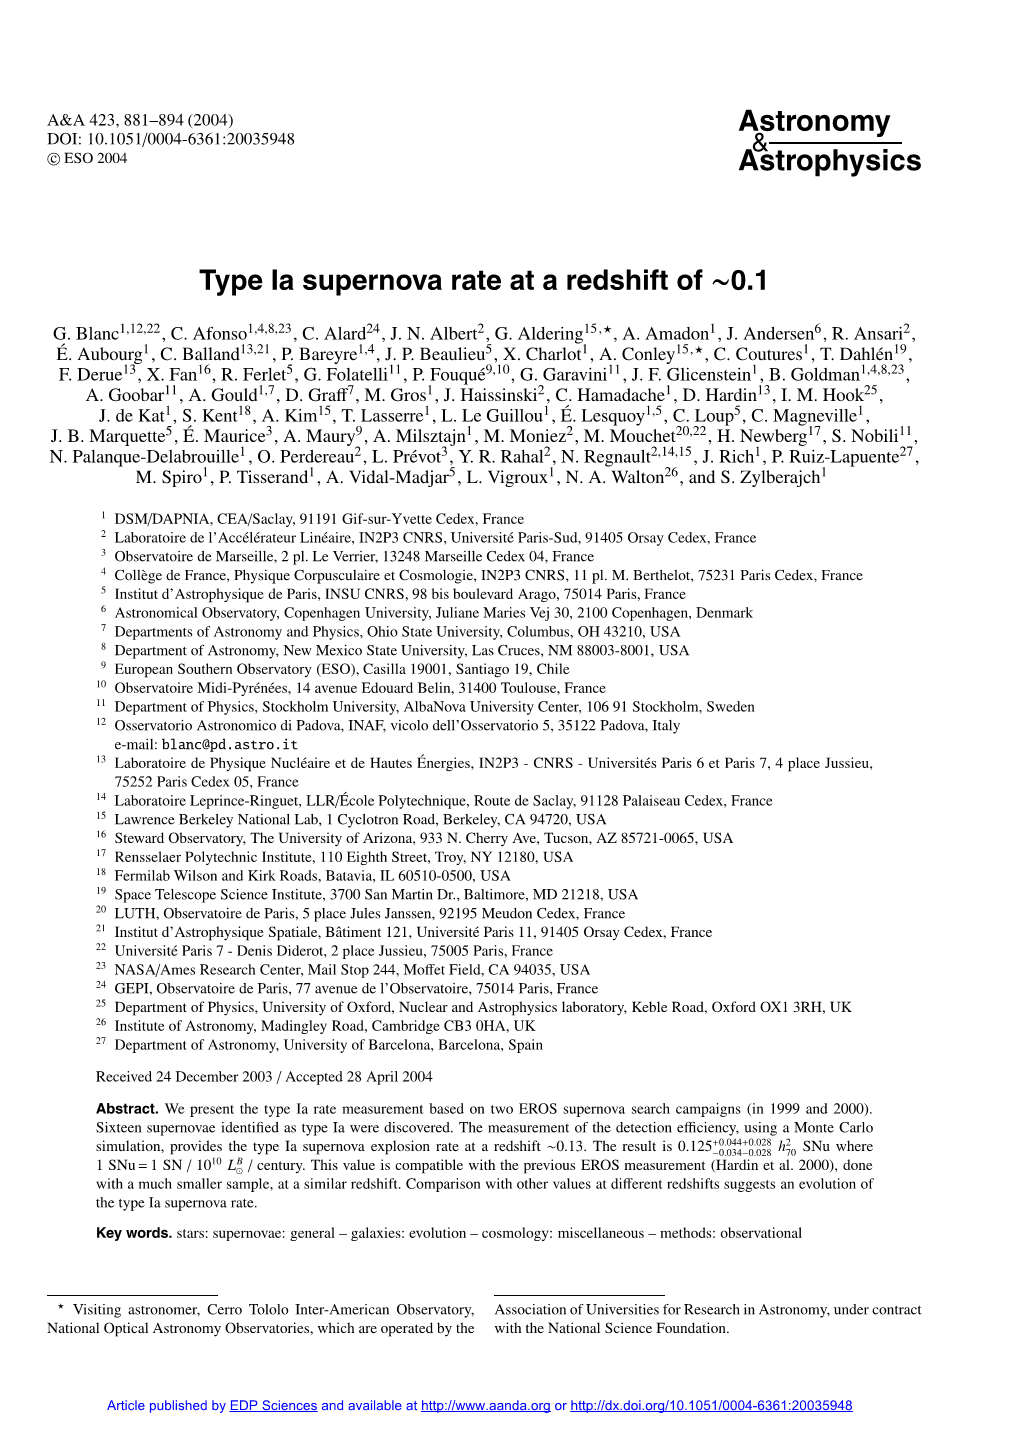 Type Ia Supernova Rate at a Redshift of ∼0.1